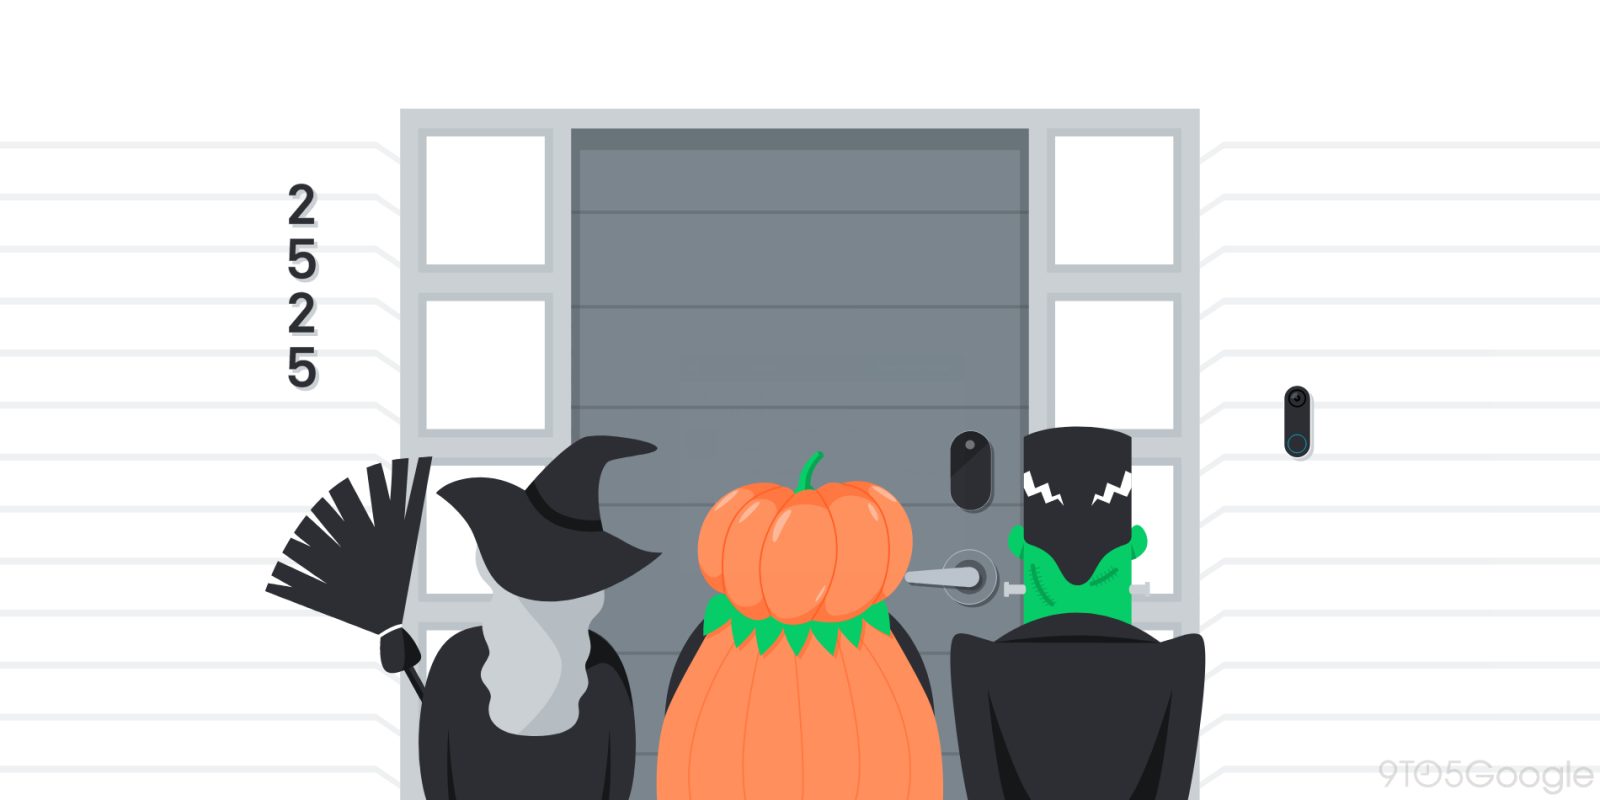 A flat style image depicting three children trick-or-treating.